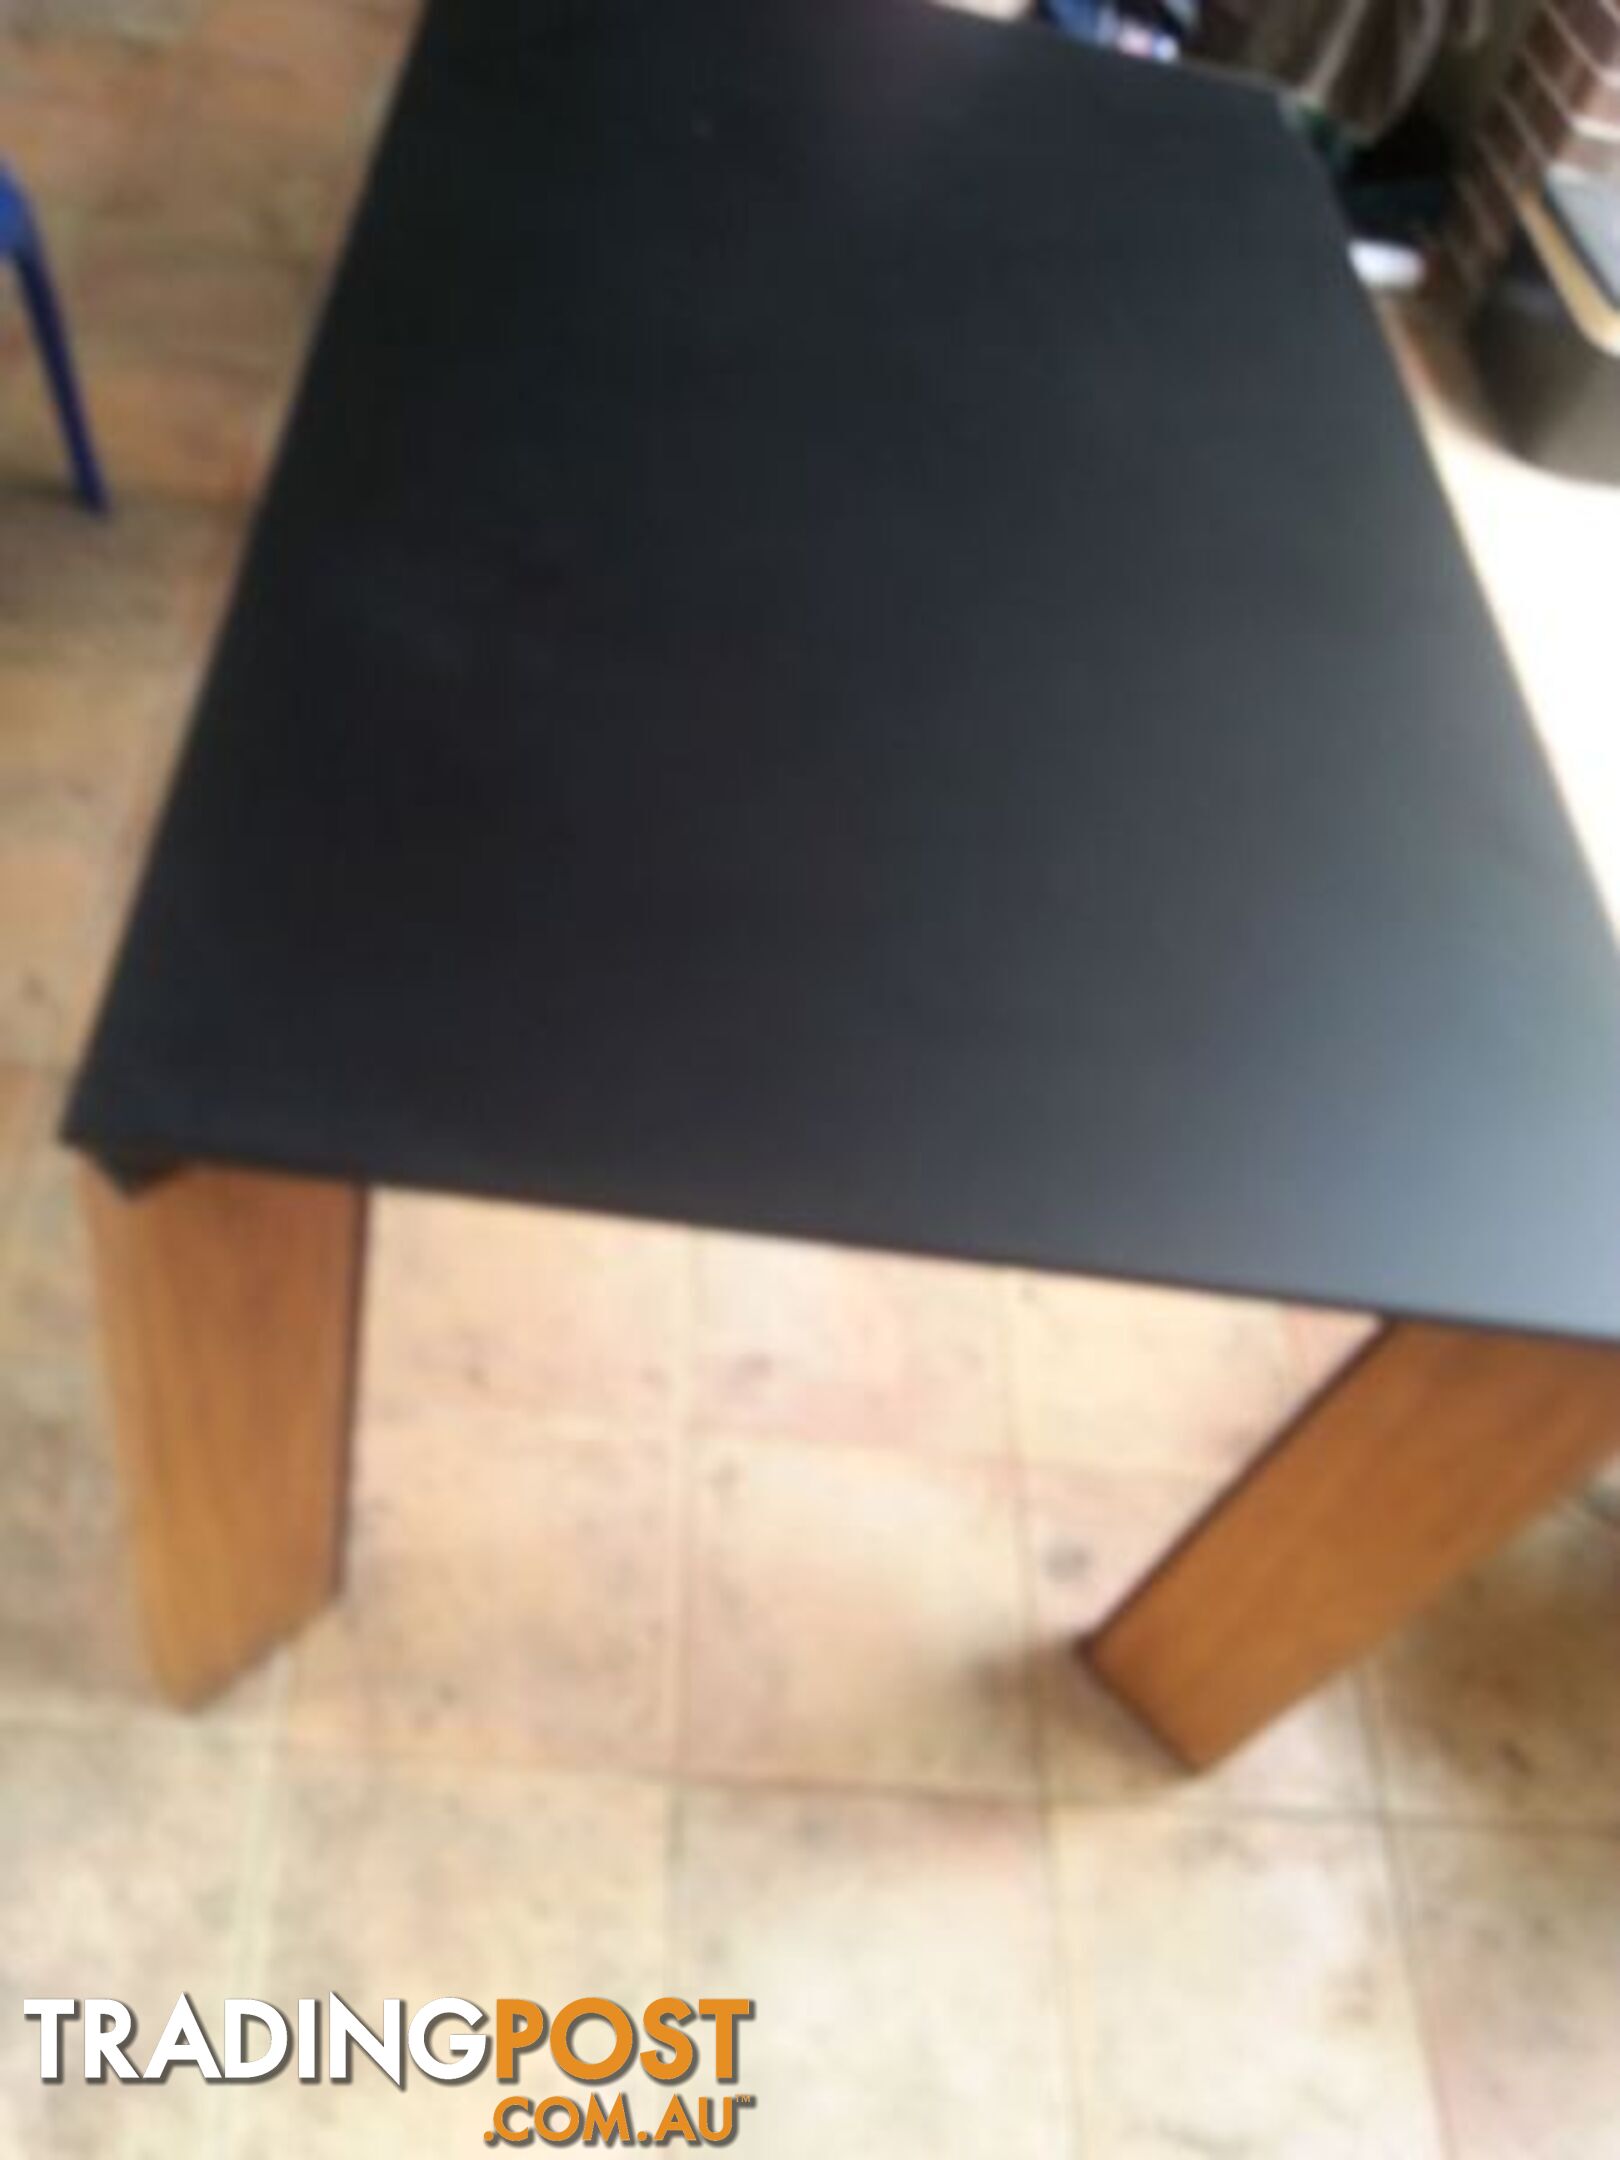 table for sale glass top with timber legs